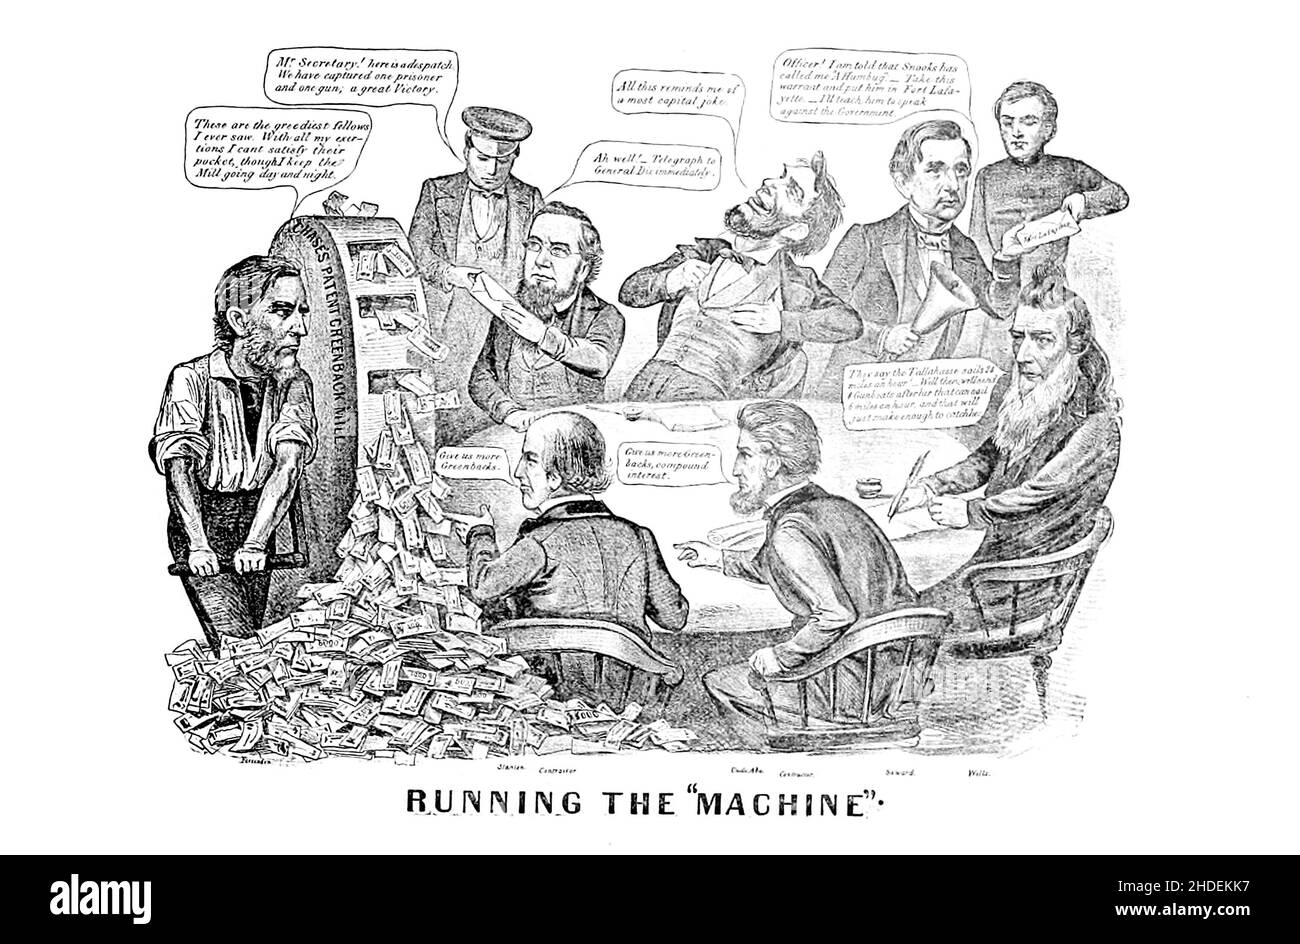 Running the Machine from a collection of Caricatures pertaining to the Civil War published in 1892 on Heavy Plate Paper Stock Photo